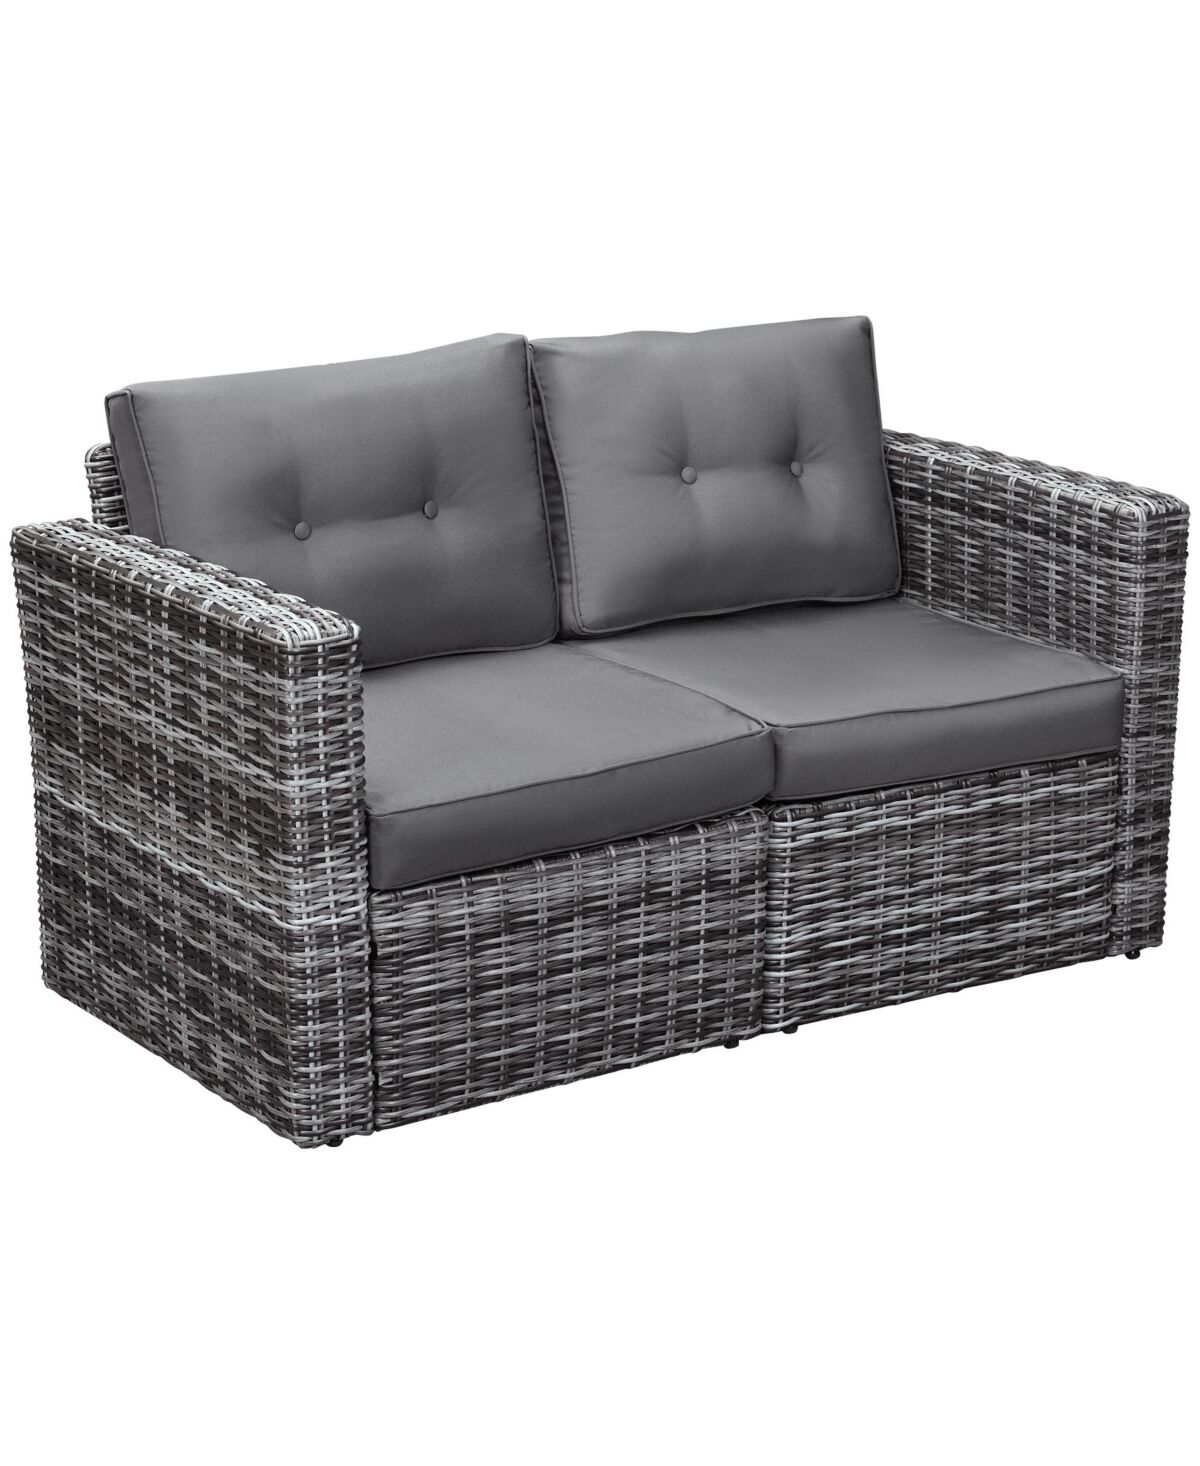 Outsunny 2 Piece Patio Wicker Corner Sofa Set, Outdoor Pe Rattan Furniture, with Curved Armrests and Padded Cushions for Balcony, Garden, or Lawn, Law